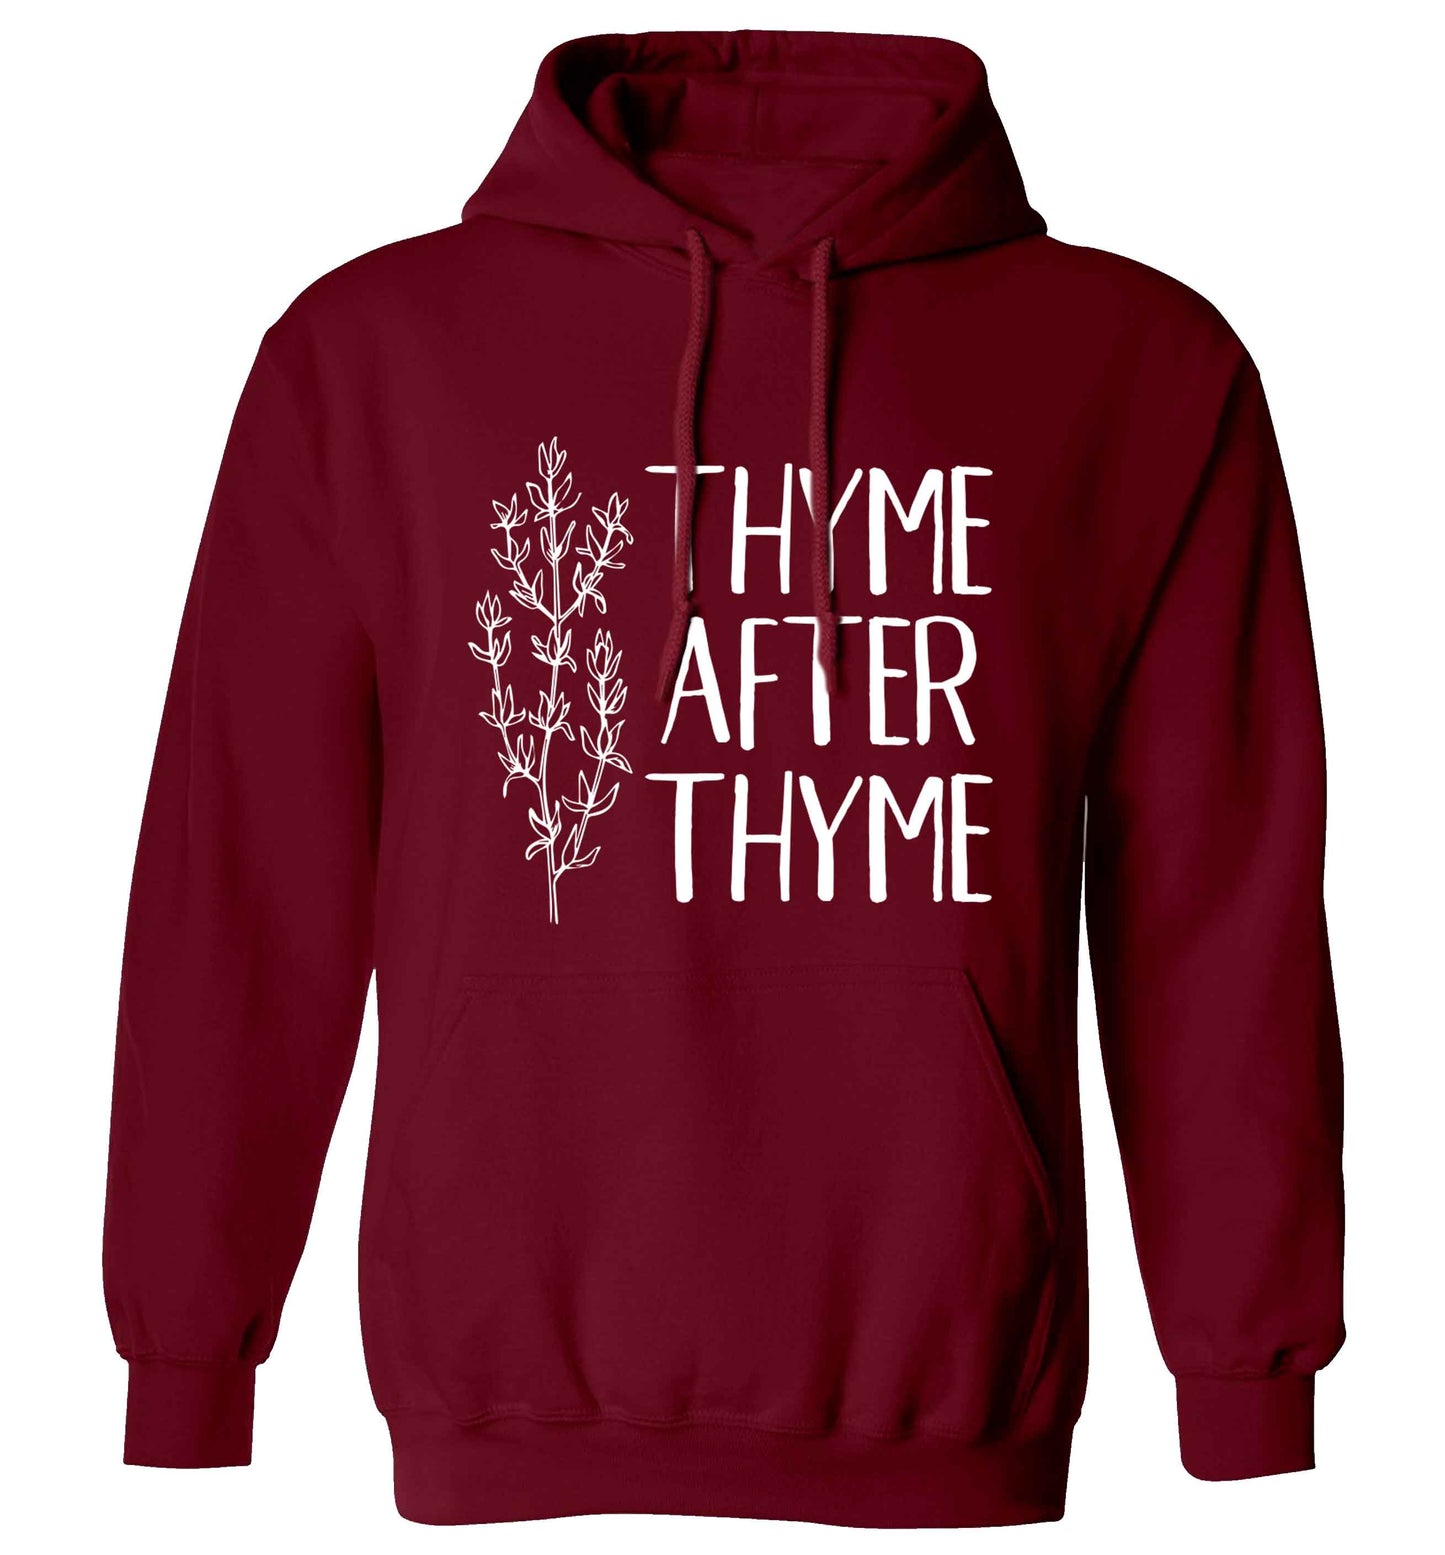 Thyme after thyme adults unisex maroon hoodie 2XL